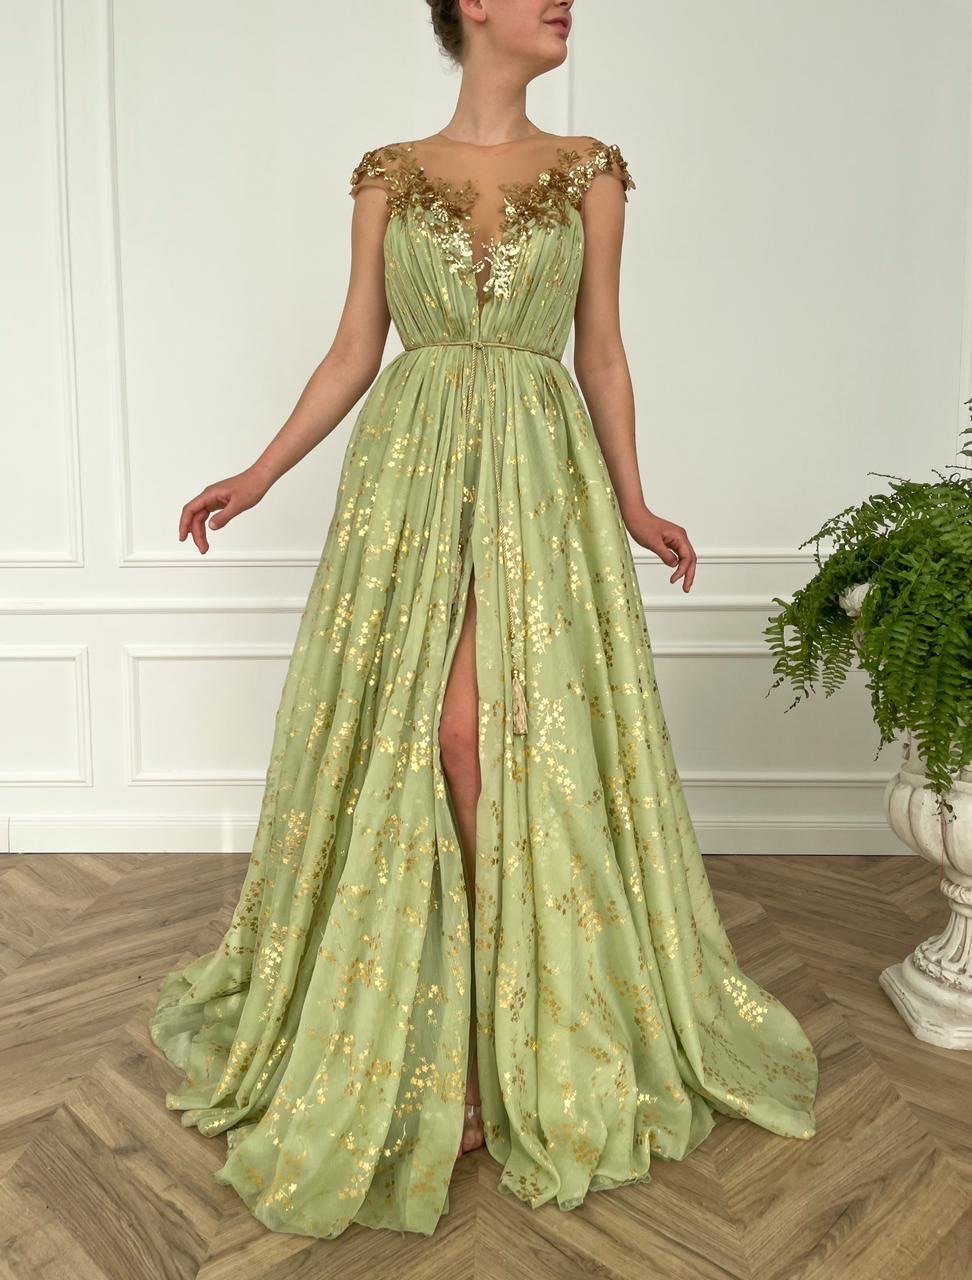 Green A-Line dress with cap sleeves, v-neck and embroidery